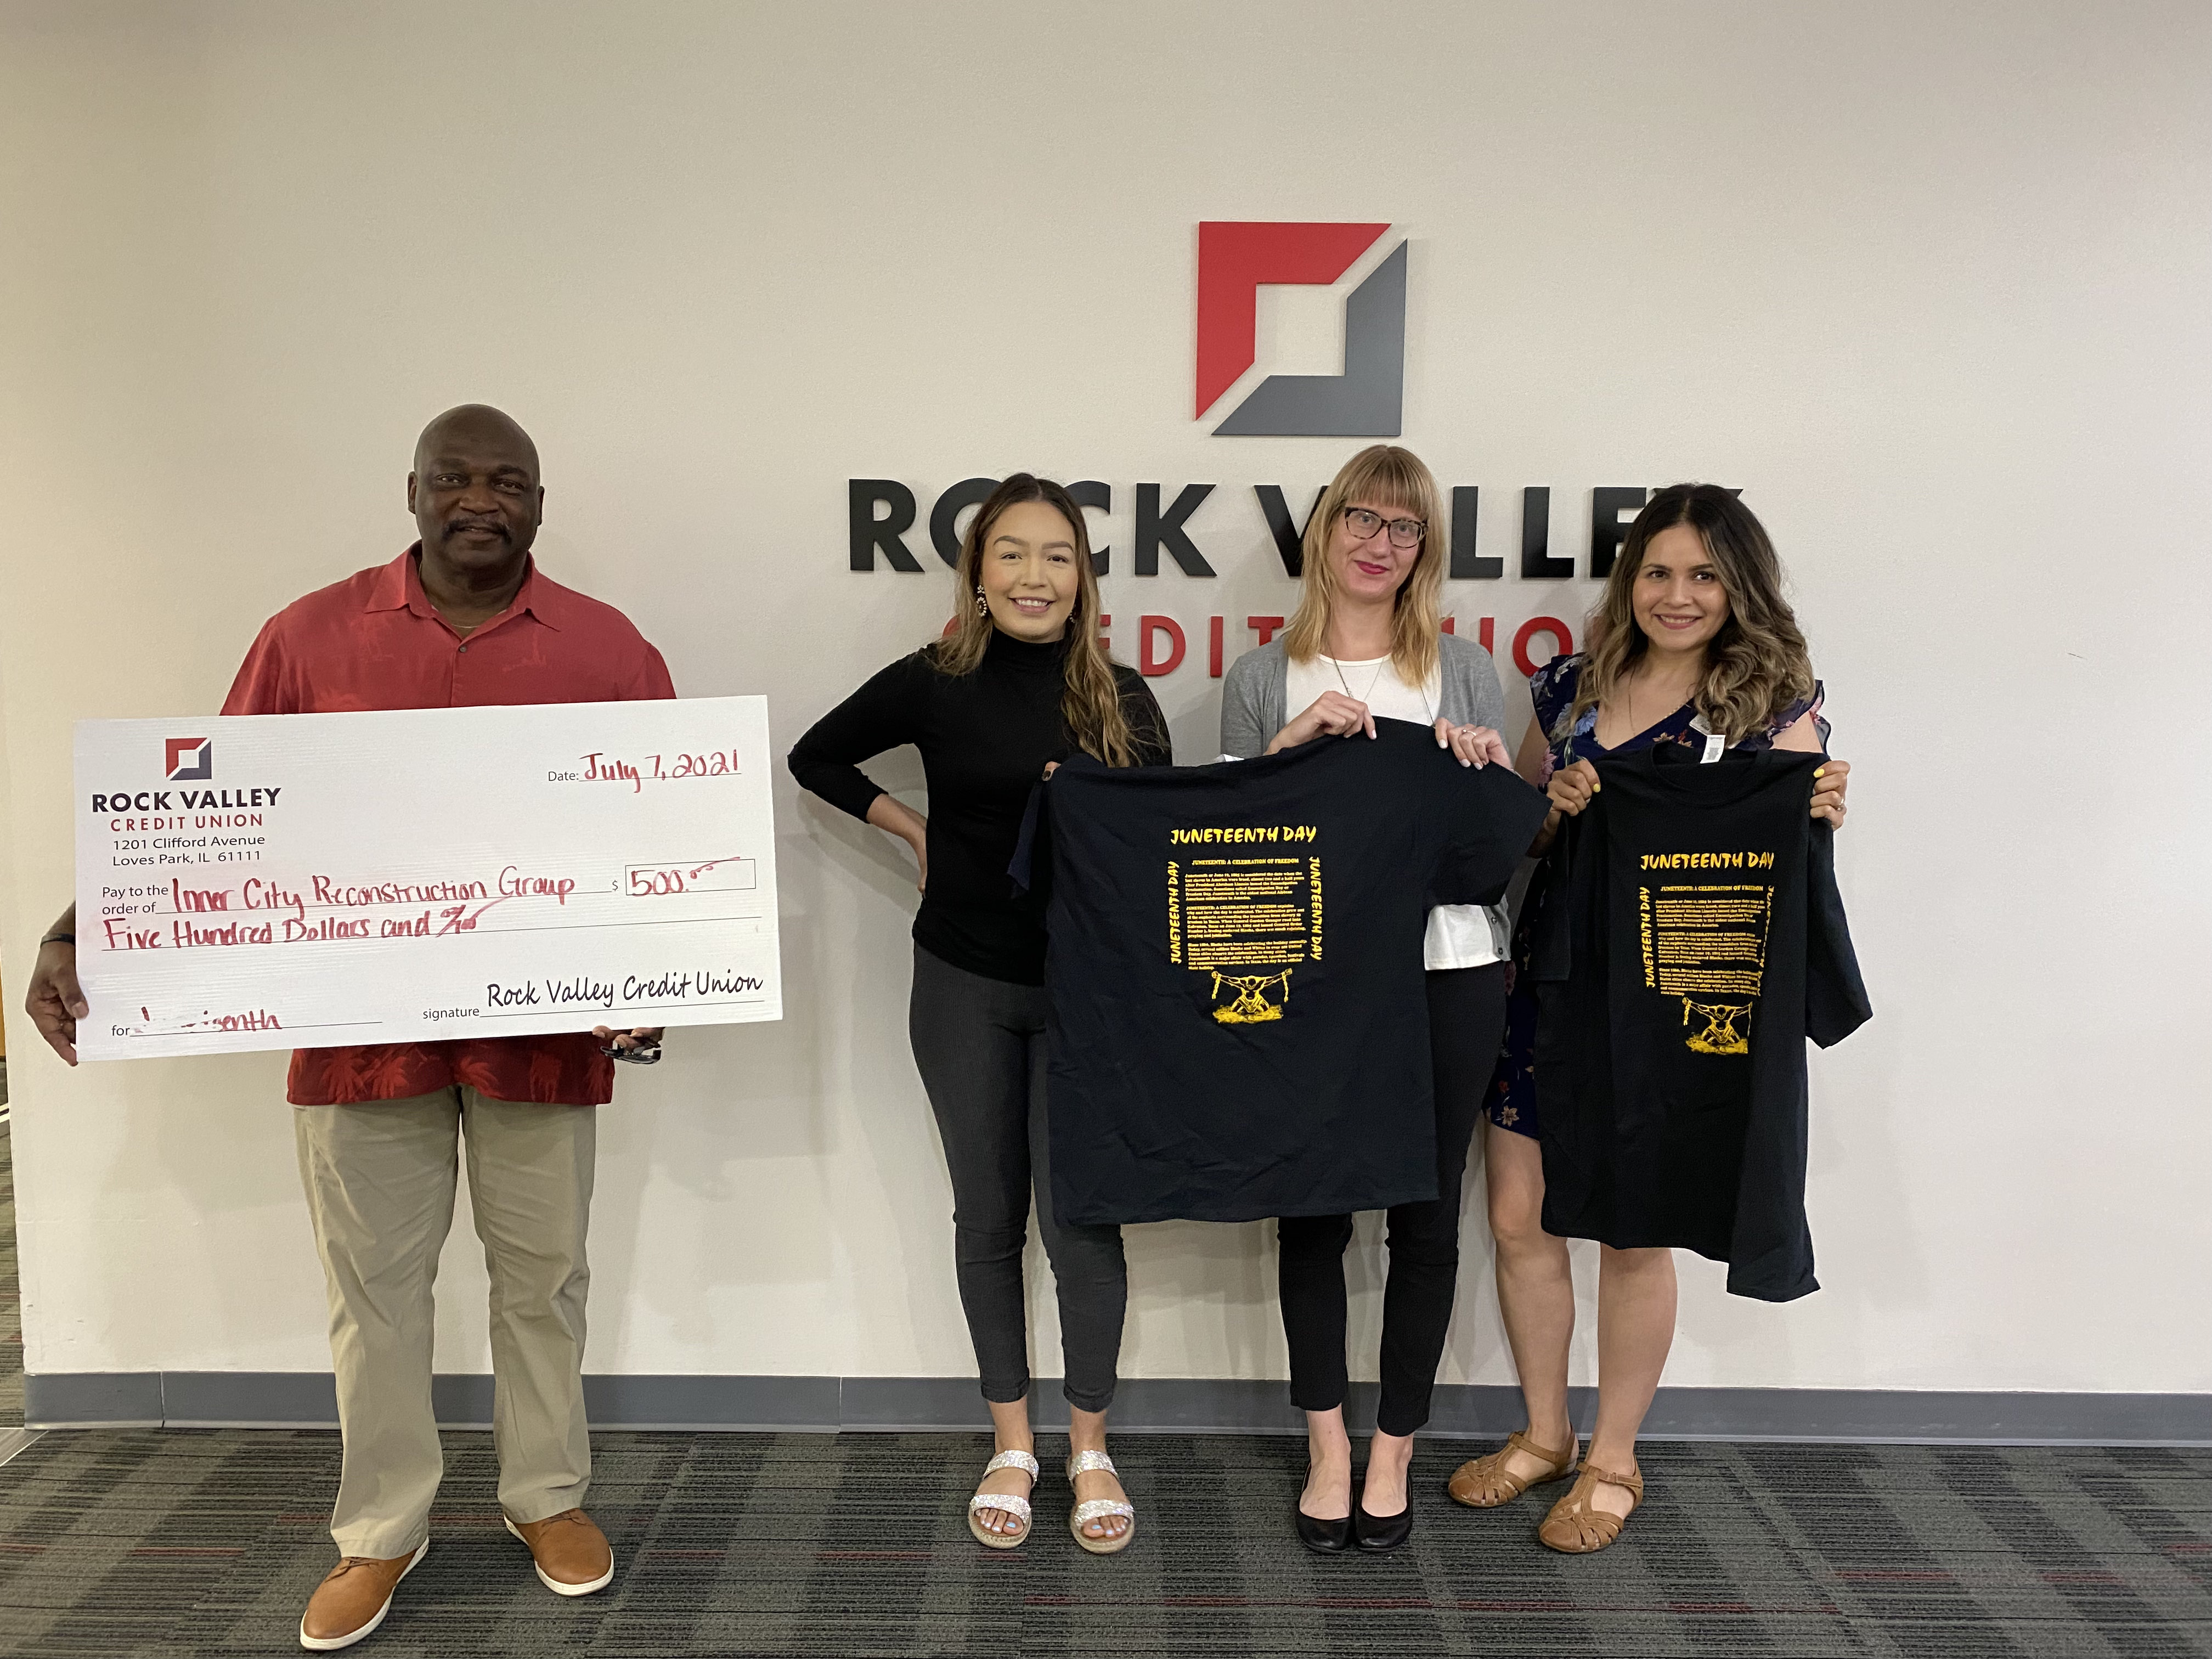 rock-valley-credit-union-raises-funds-for-rockford-juneteenth